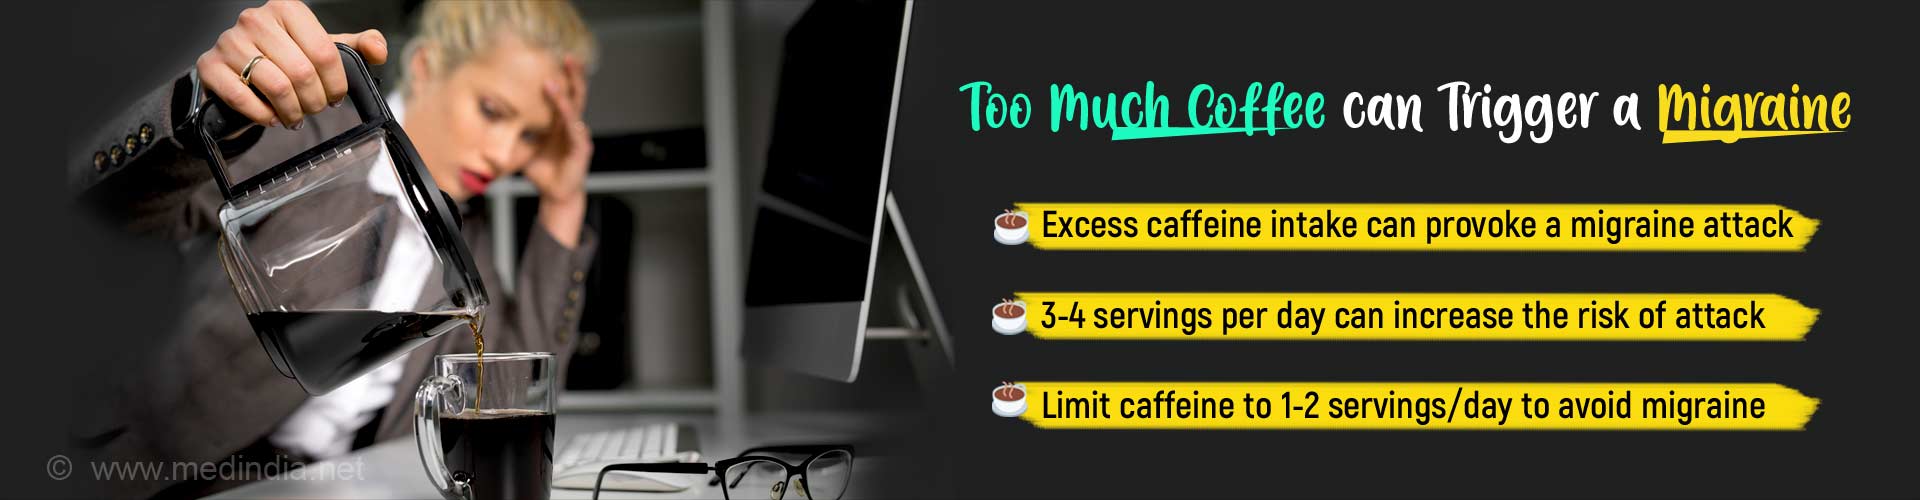 Too much coffee can trigger a migraine. Excess caffeine intake can provoke a migraine attack. 3 - 4 servings per day can increase the risk of attack. Limit caffeine to 1- 2servings/day to avoid migraine.